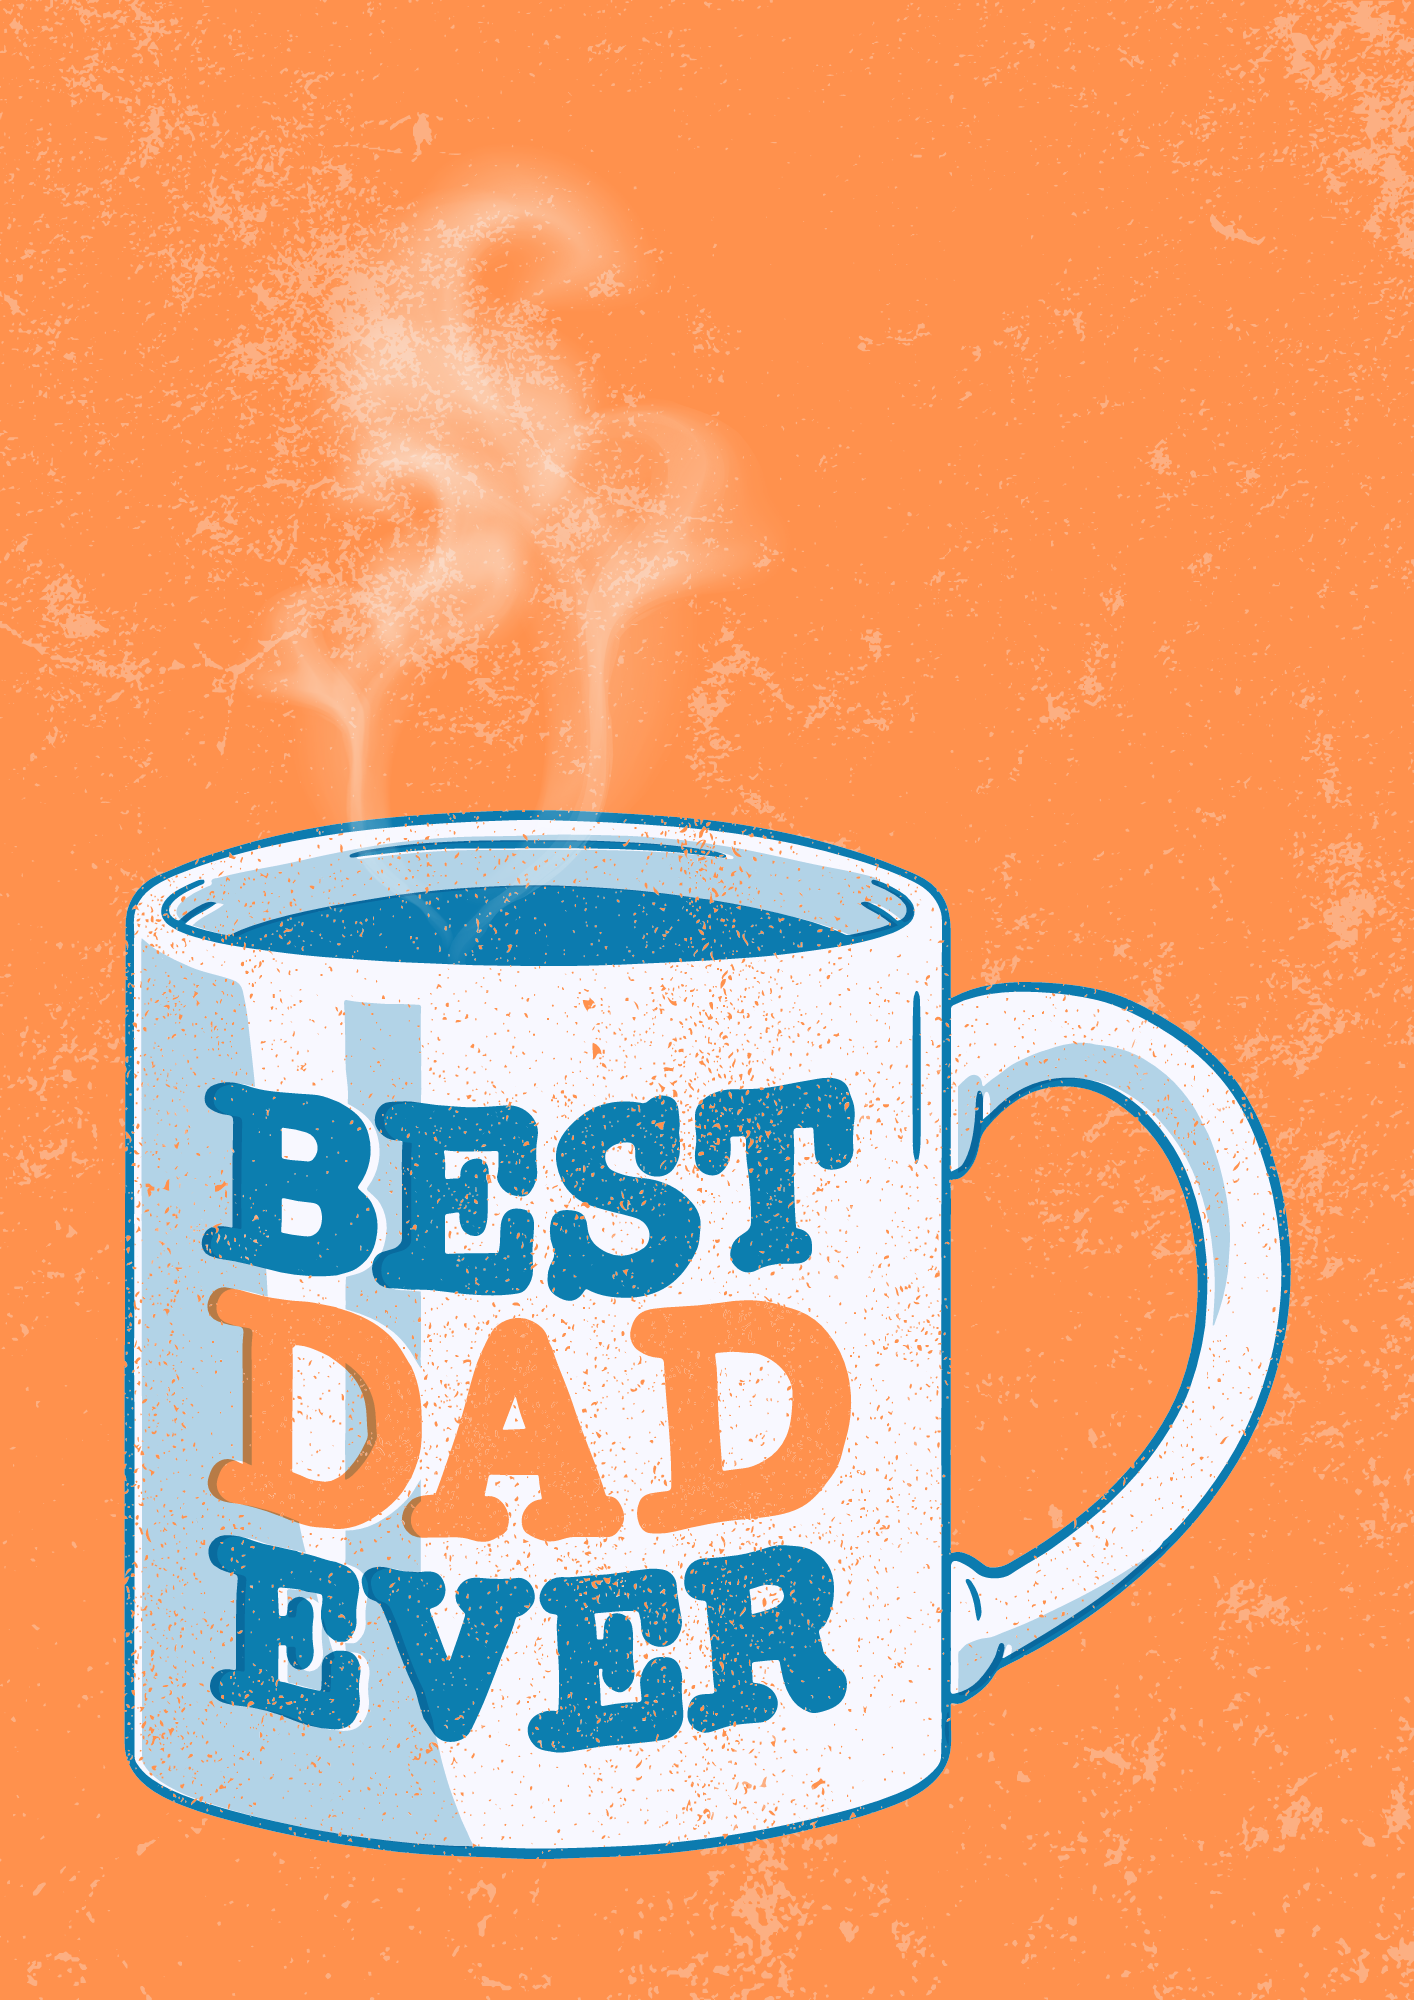 Best Dad Ever Mug - Greeting Card For Father's Day